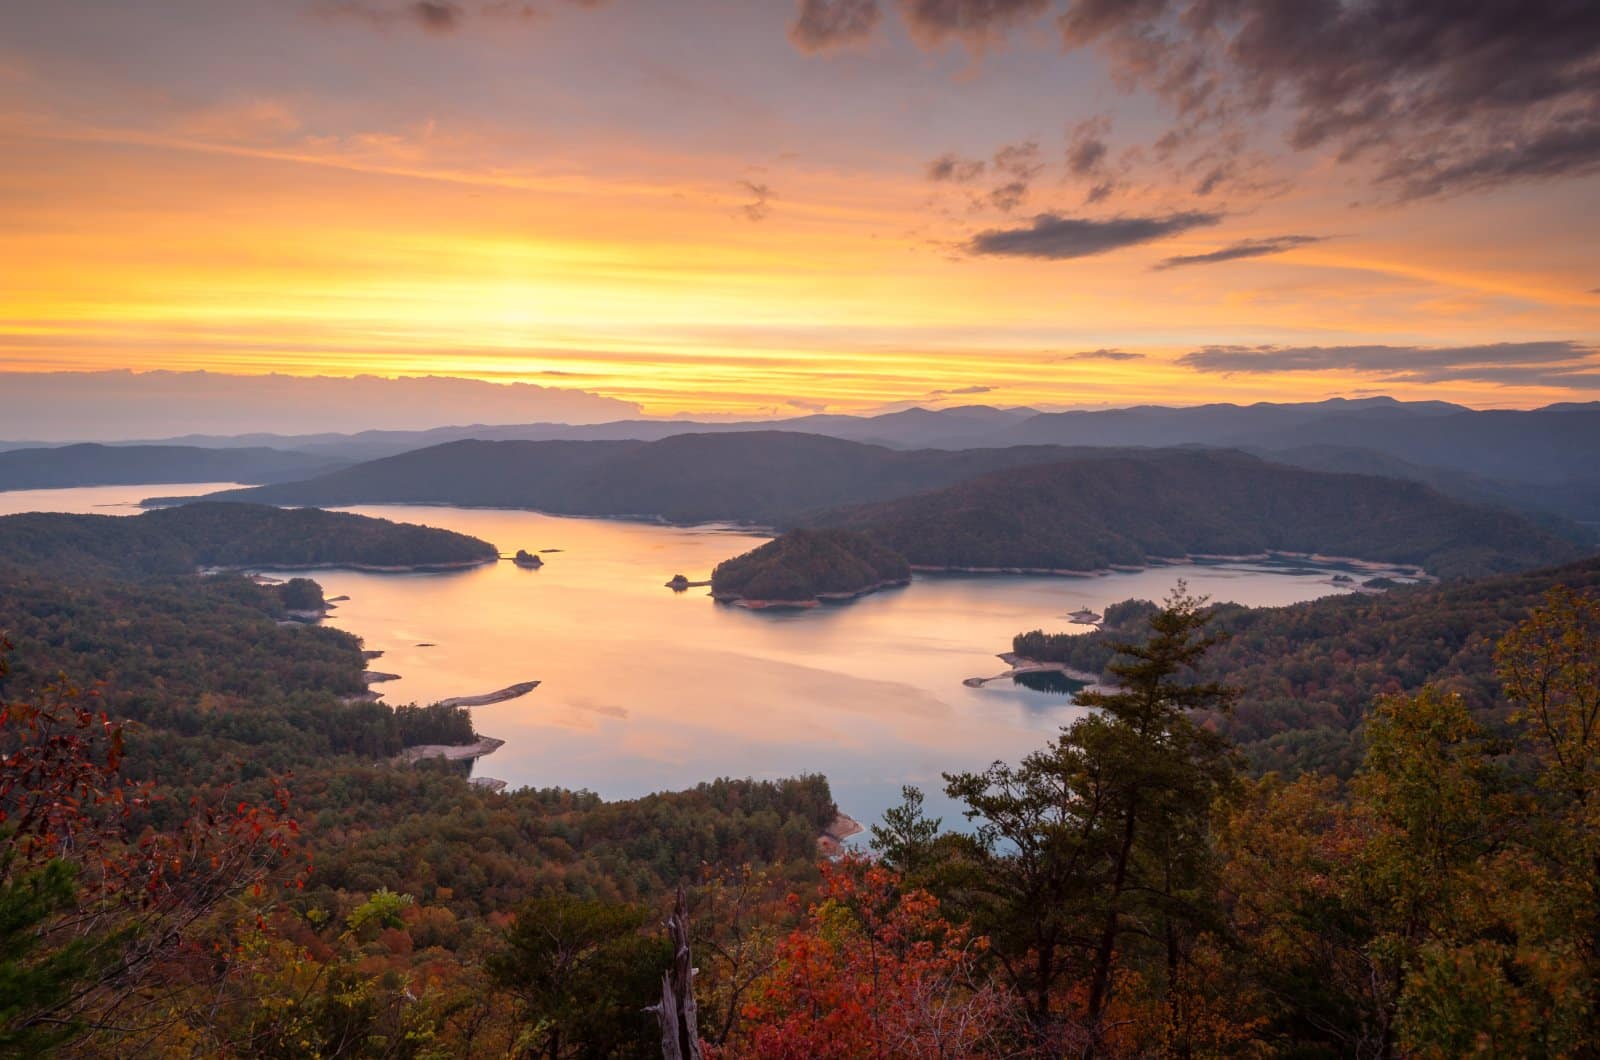 <p class="wp-caption-text">Image Credit: Shutterstock / MarkVanDykePhotography</p>  <p><span><strong>Depth:</strong> 300 feet</span> <span>Tucked away in the Appalachian Mountains, Lake Jocassee is prized for its crystal-clear waters, cascading waterfalls, and secluded coves.</span></p>